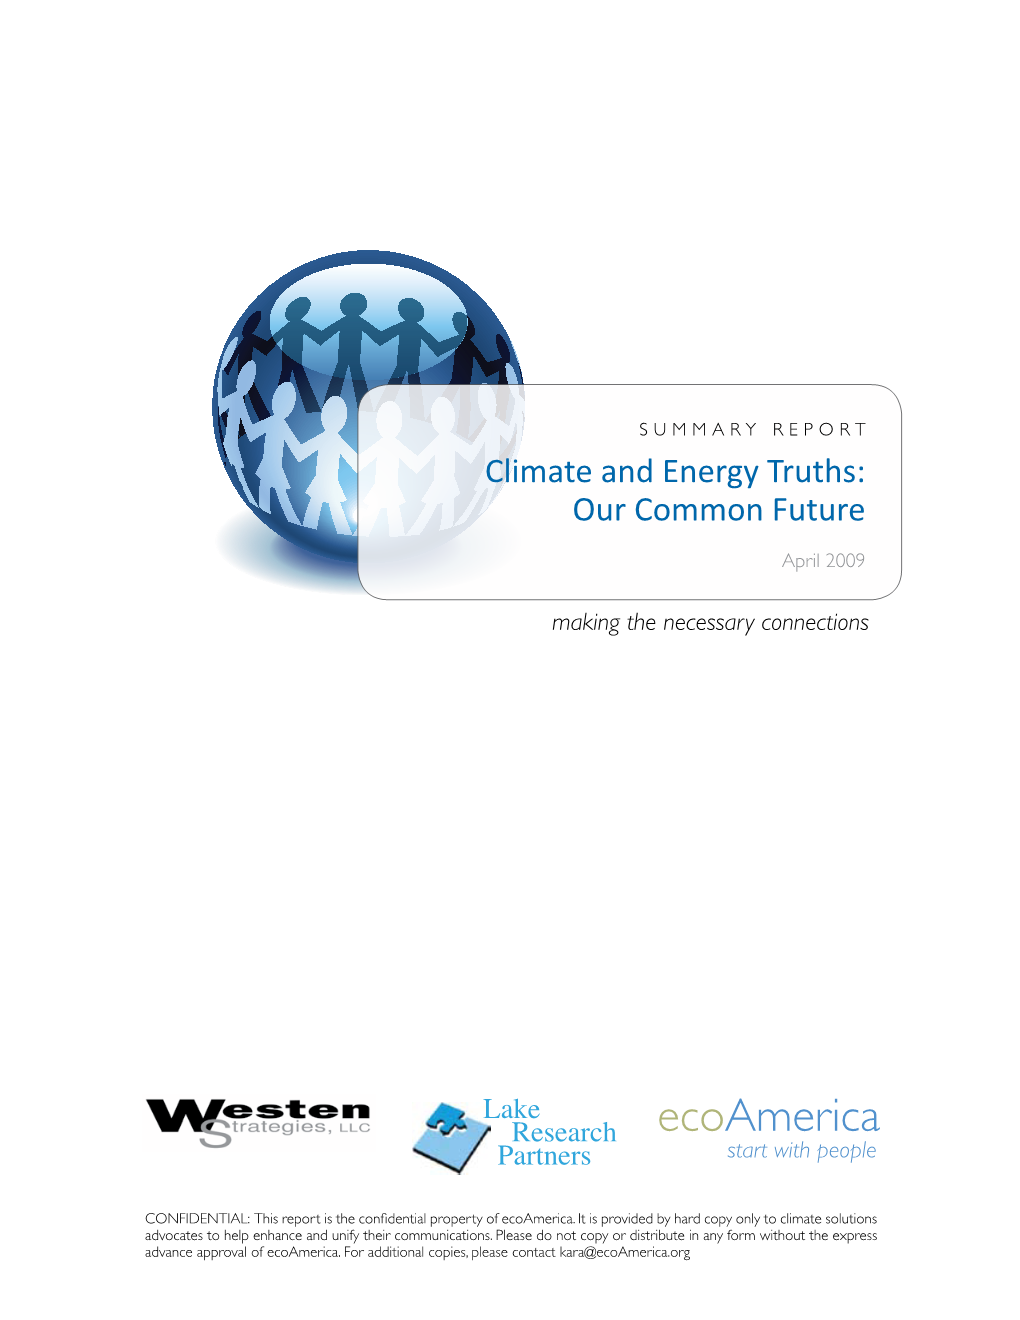 Climate and Energy Truths: Our Common Future